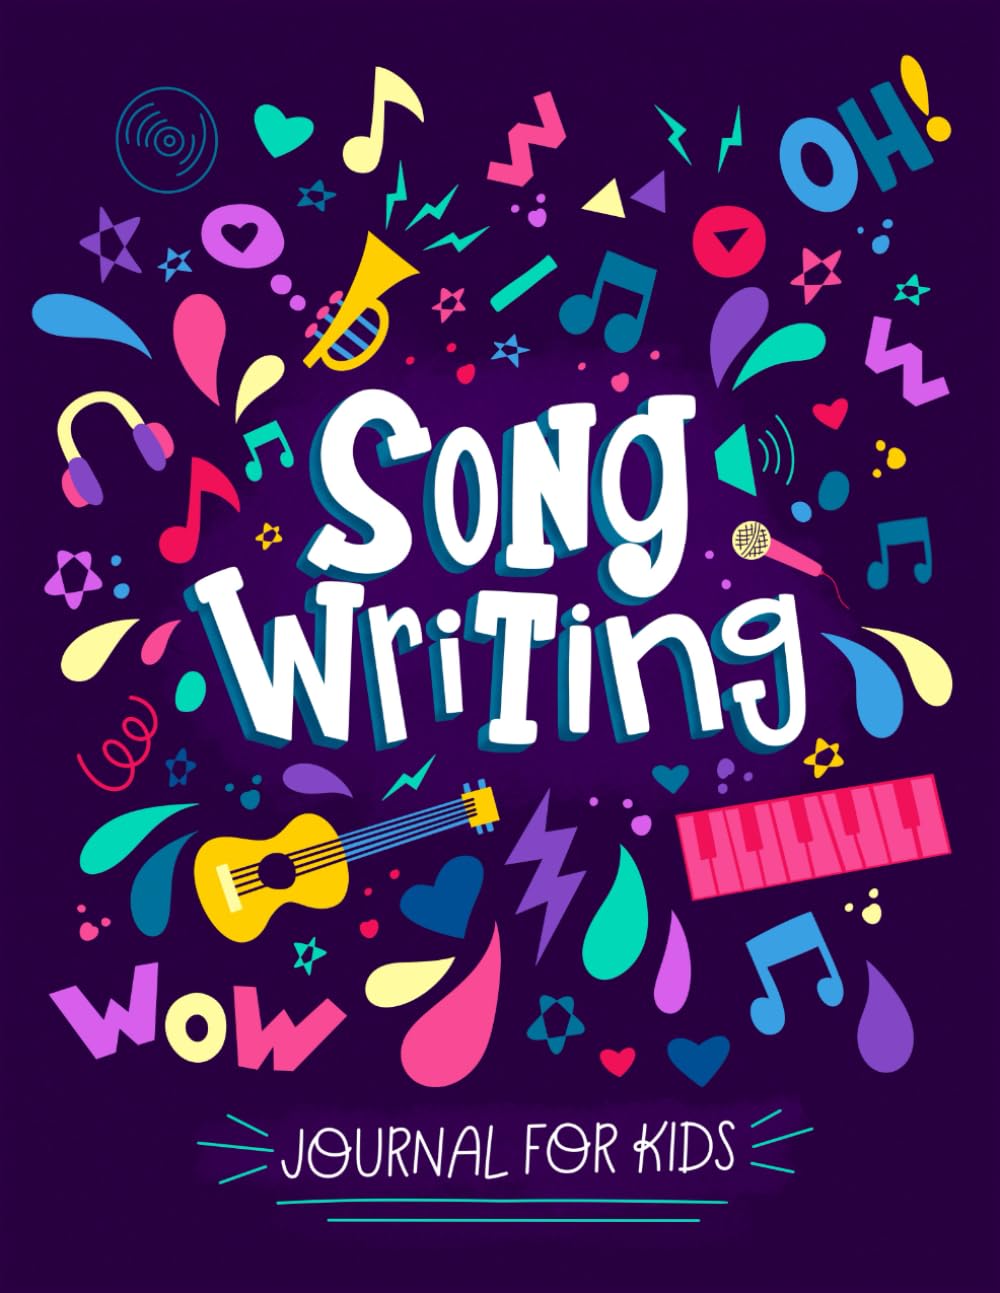 Song Writing Journal for Kids: Notebook Featuring Blank Wide Staff Sheet Music, Manuscript Paper with Lines for Lyrics or Notes, and An Introduction to Basic Music Theory | For Children and Beginners